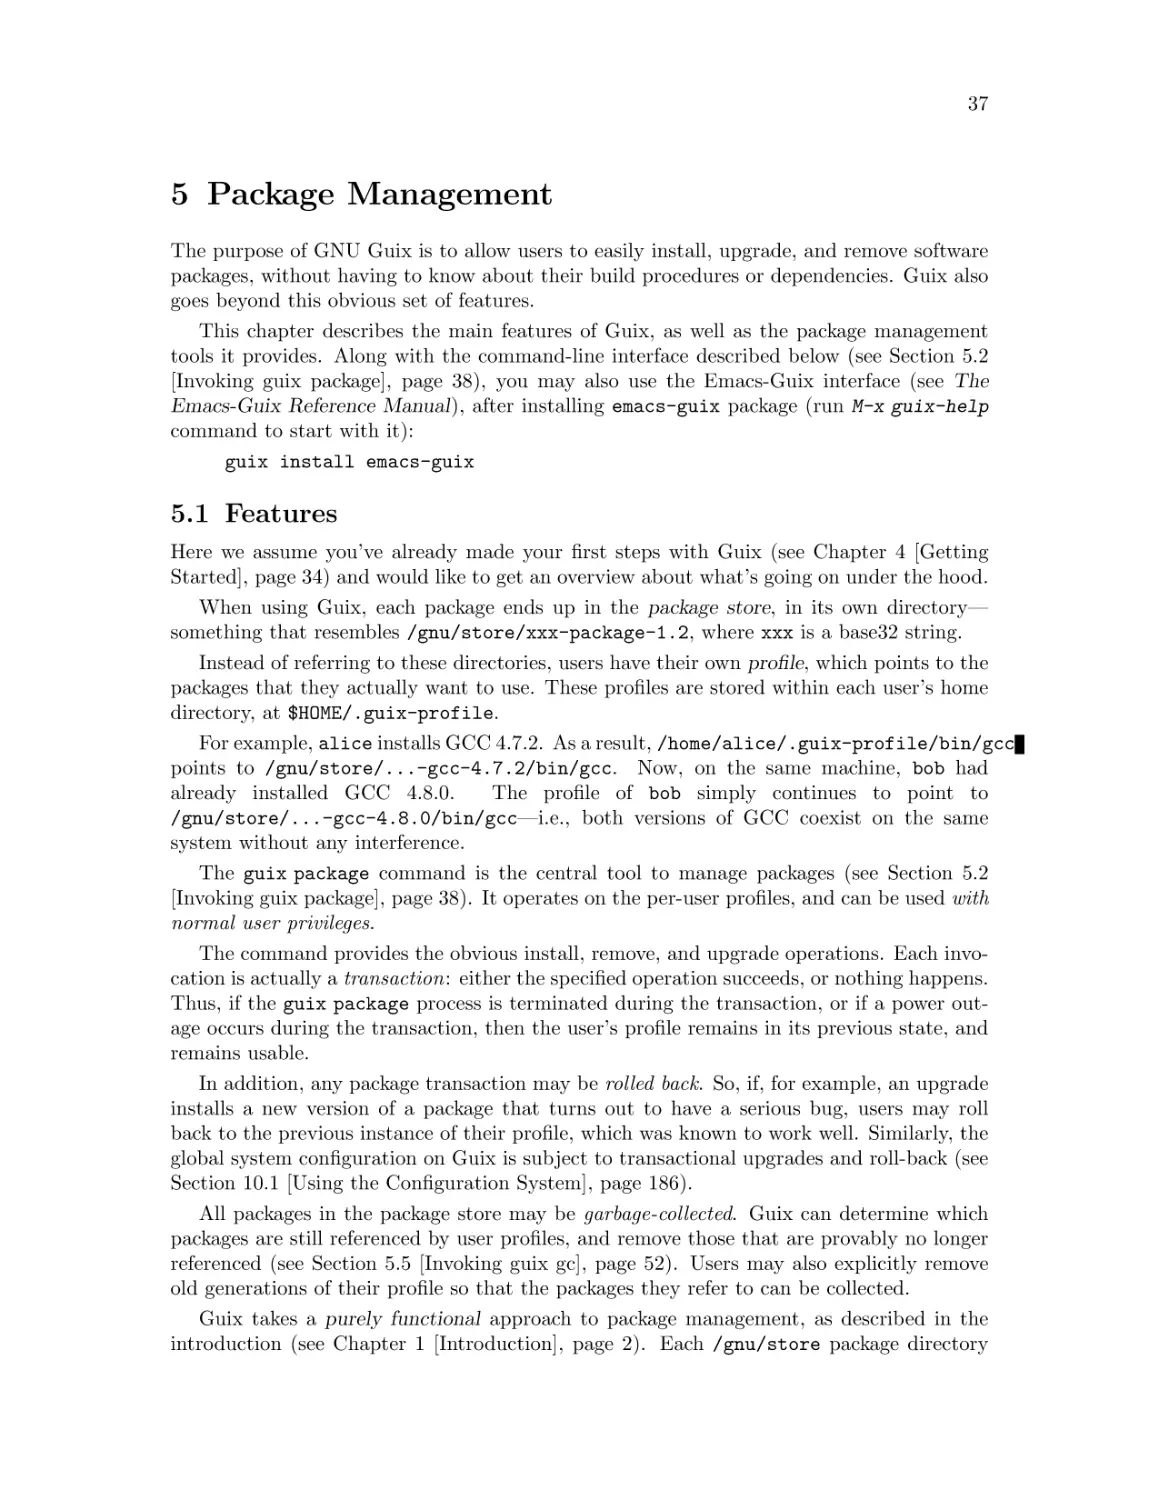 Package Management
Features